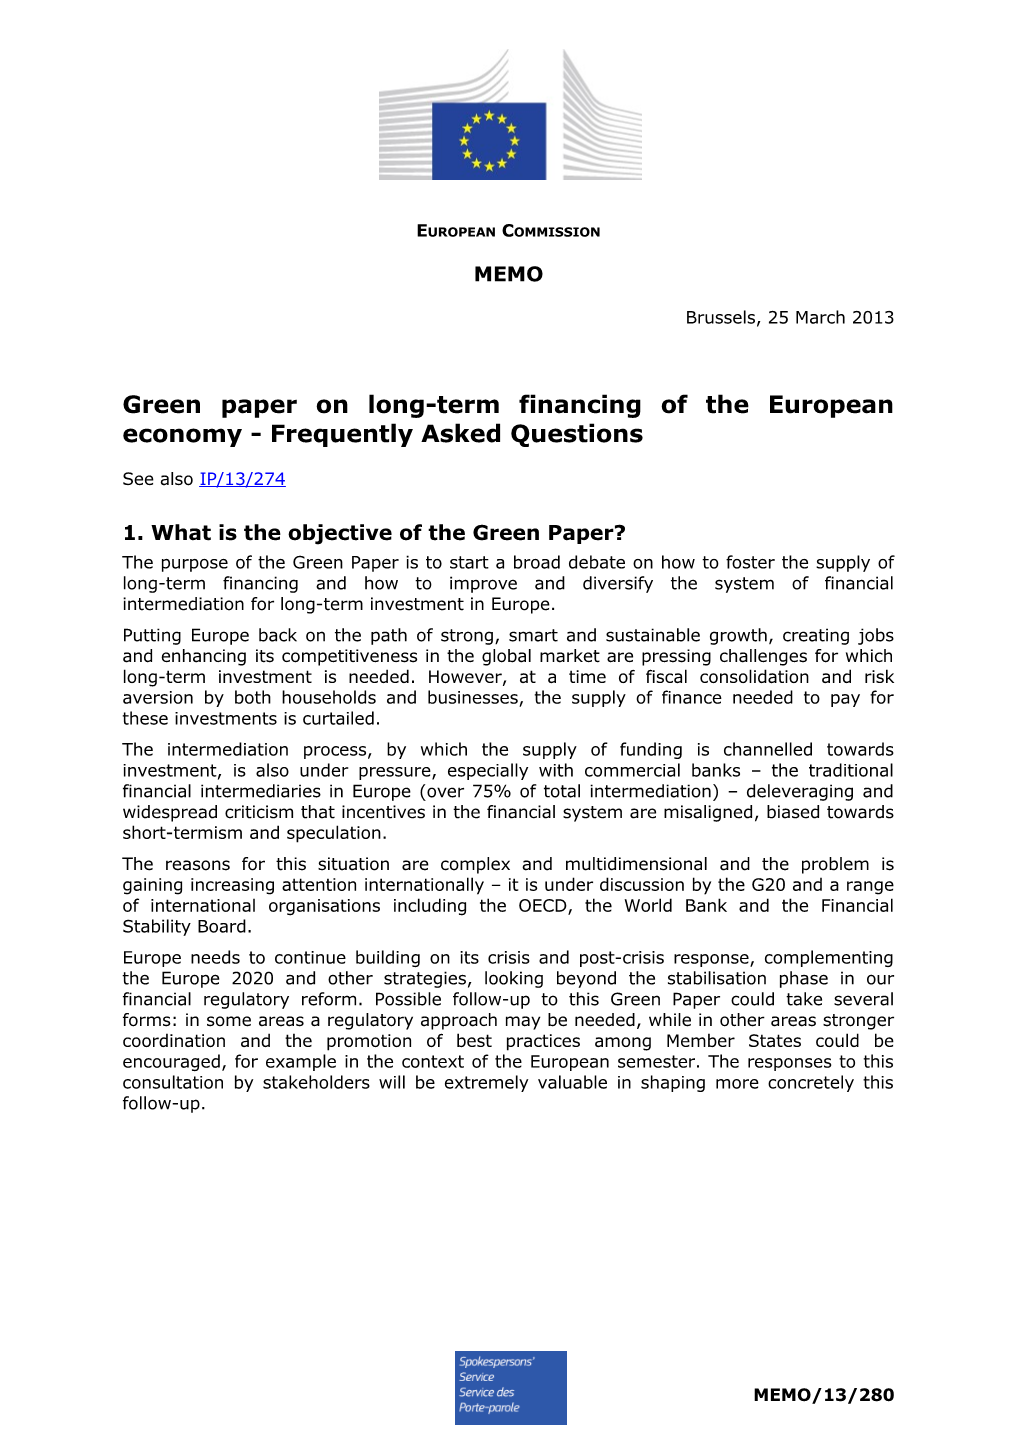 Green Paper on Long-Term Financing of the European Economy - Frequently Asked Questions